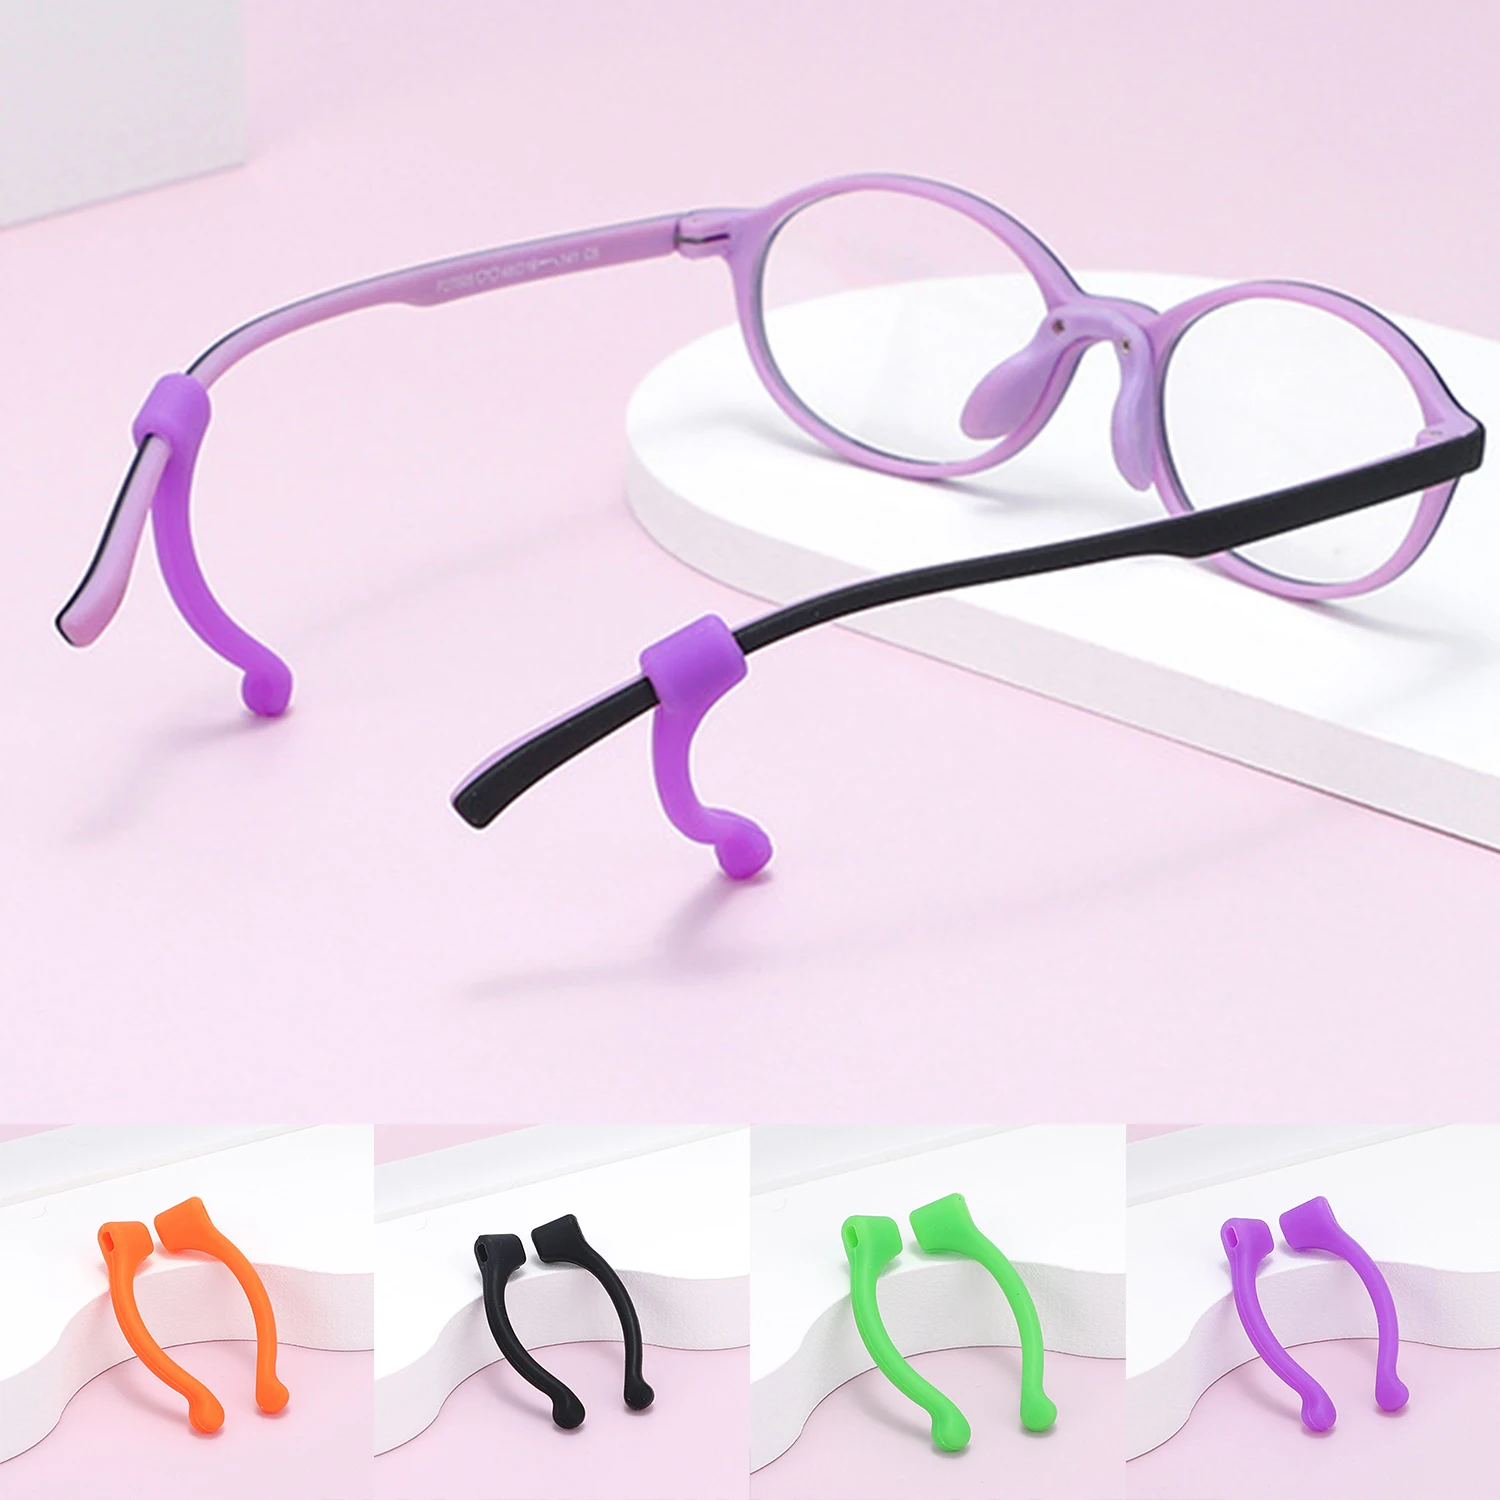 

1 Pair Anti Slip Silicone Glasses Ear Hooks For Kids And Adults Round Grips Eyeglasses Sports Temple Tips Soft Ear Hook